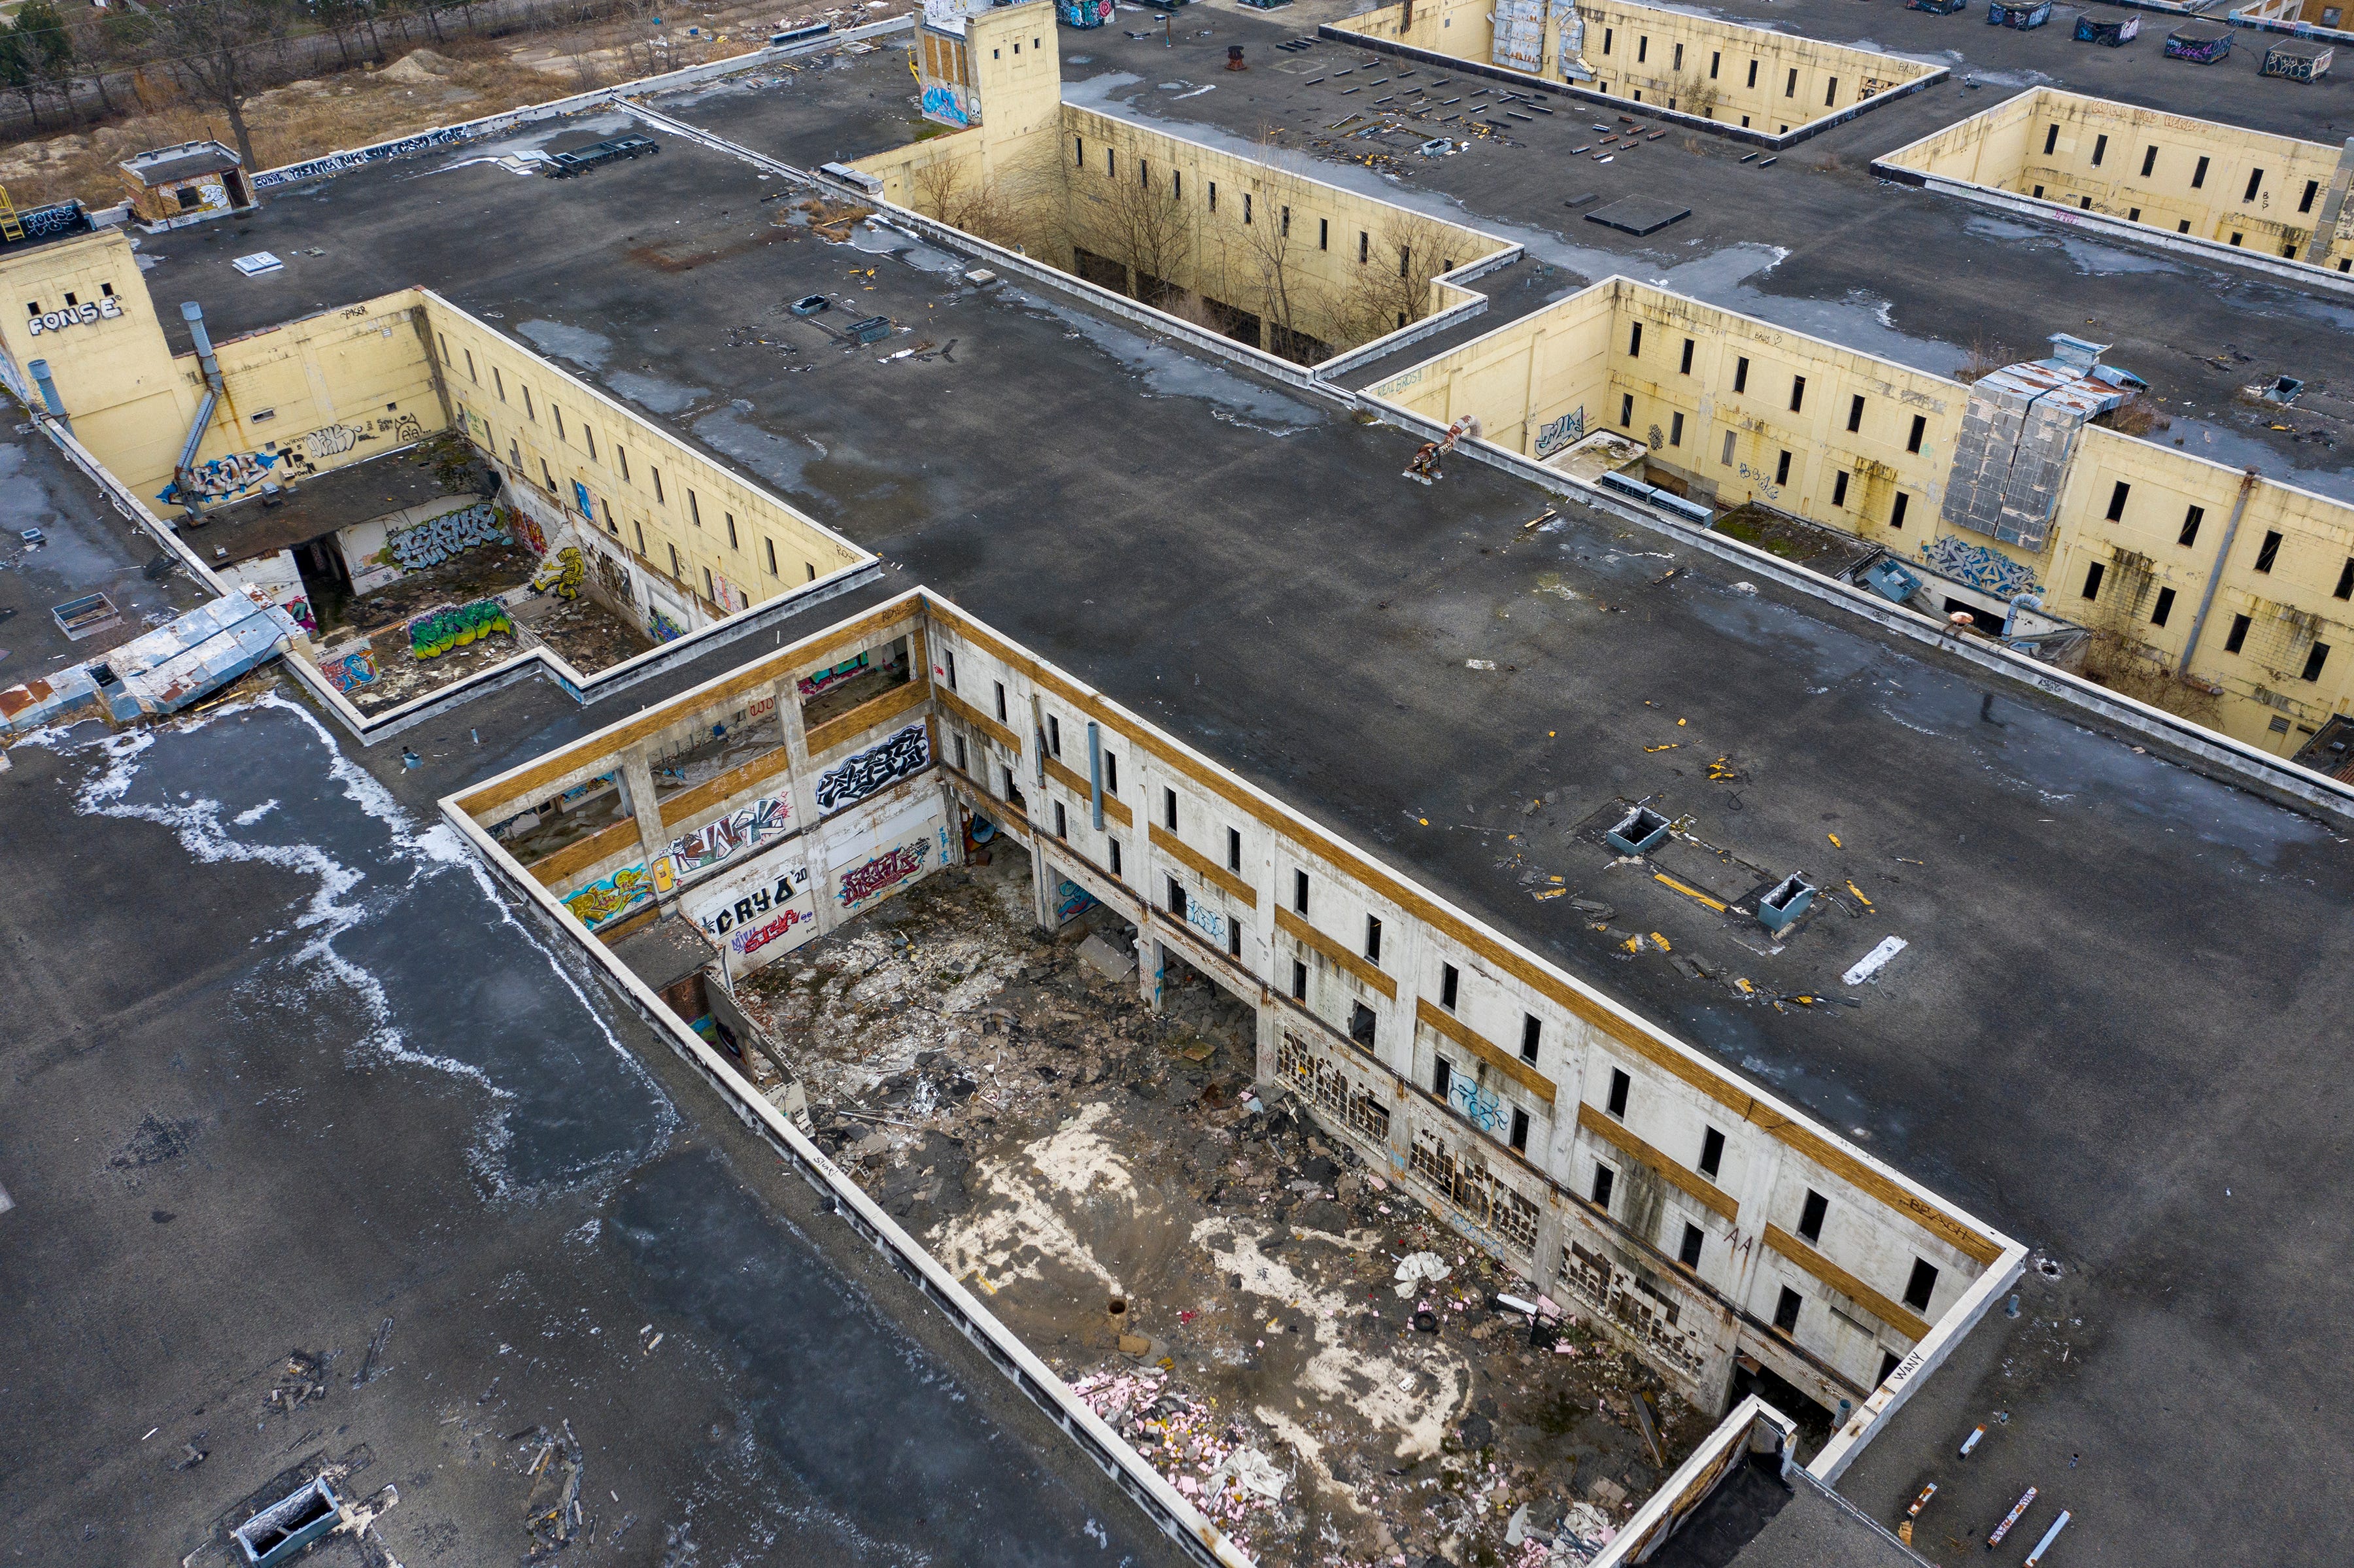 An aerial view of the former American Motor headquarters in Detroit that has sat abandoned since 2010, on Thursday, Dec. 9, 2021. An agreement between NorthPoint Development and the city would sell the city-owned land, including the buildings and 26 residential parcels, to NorthPoint Development for nearly $5.9 million. The company proposes to raze the existing facility and build a new industrial complex suitable for an automotive supplier.